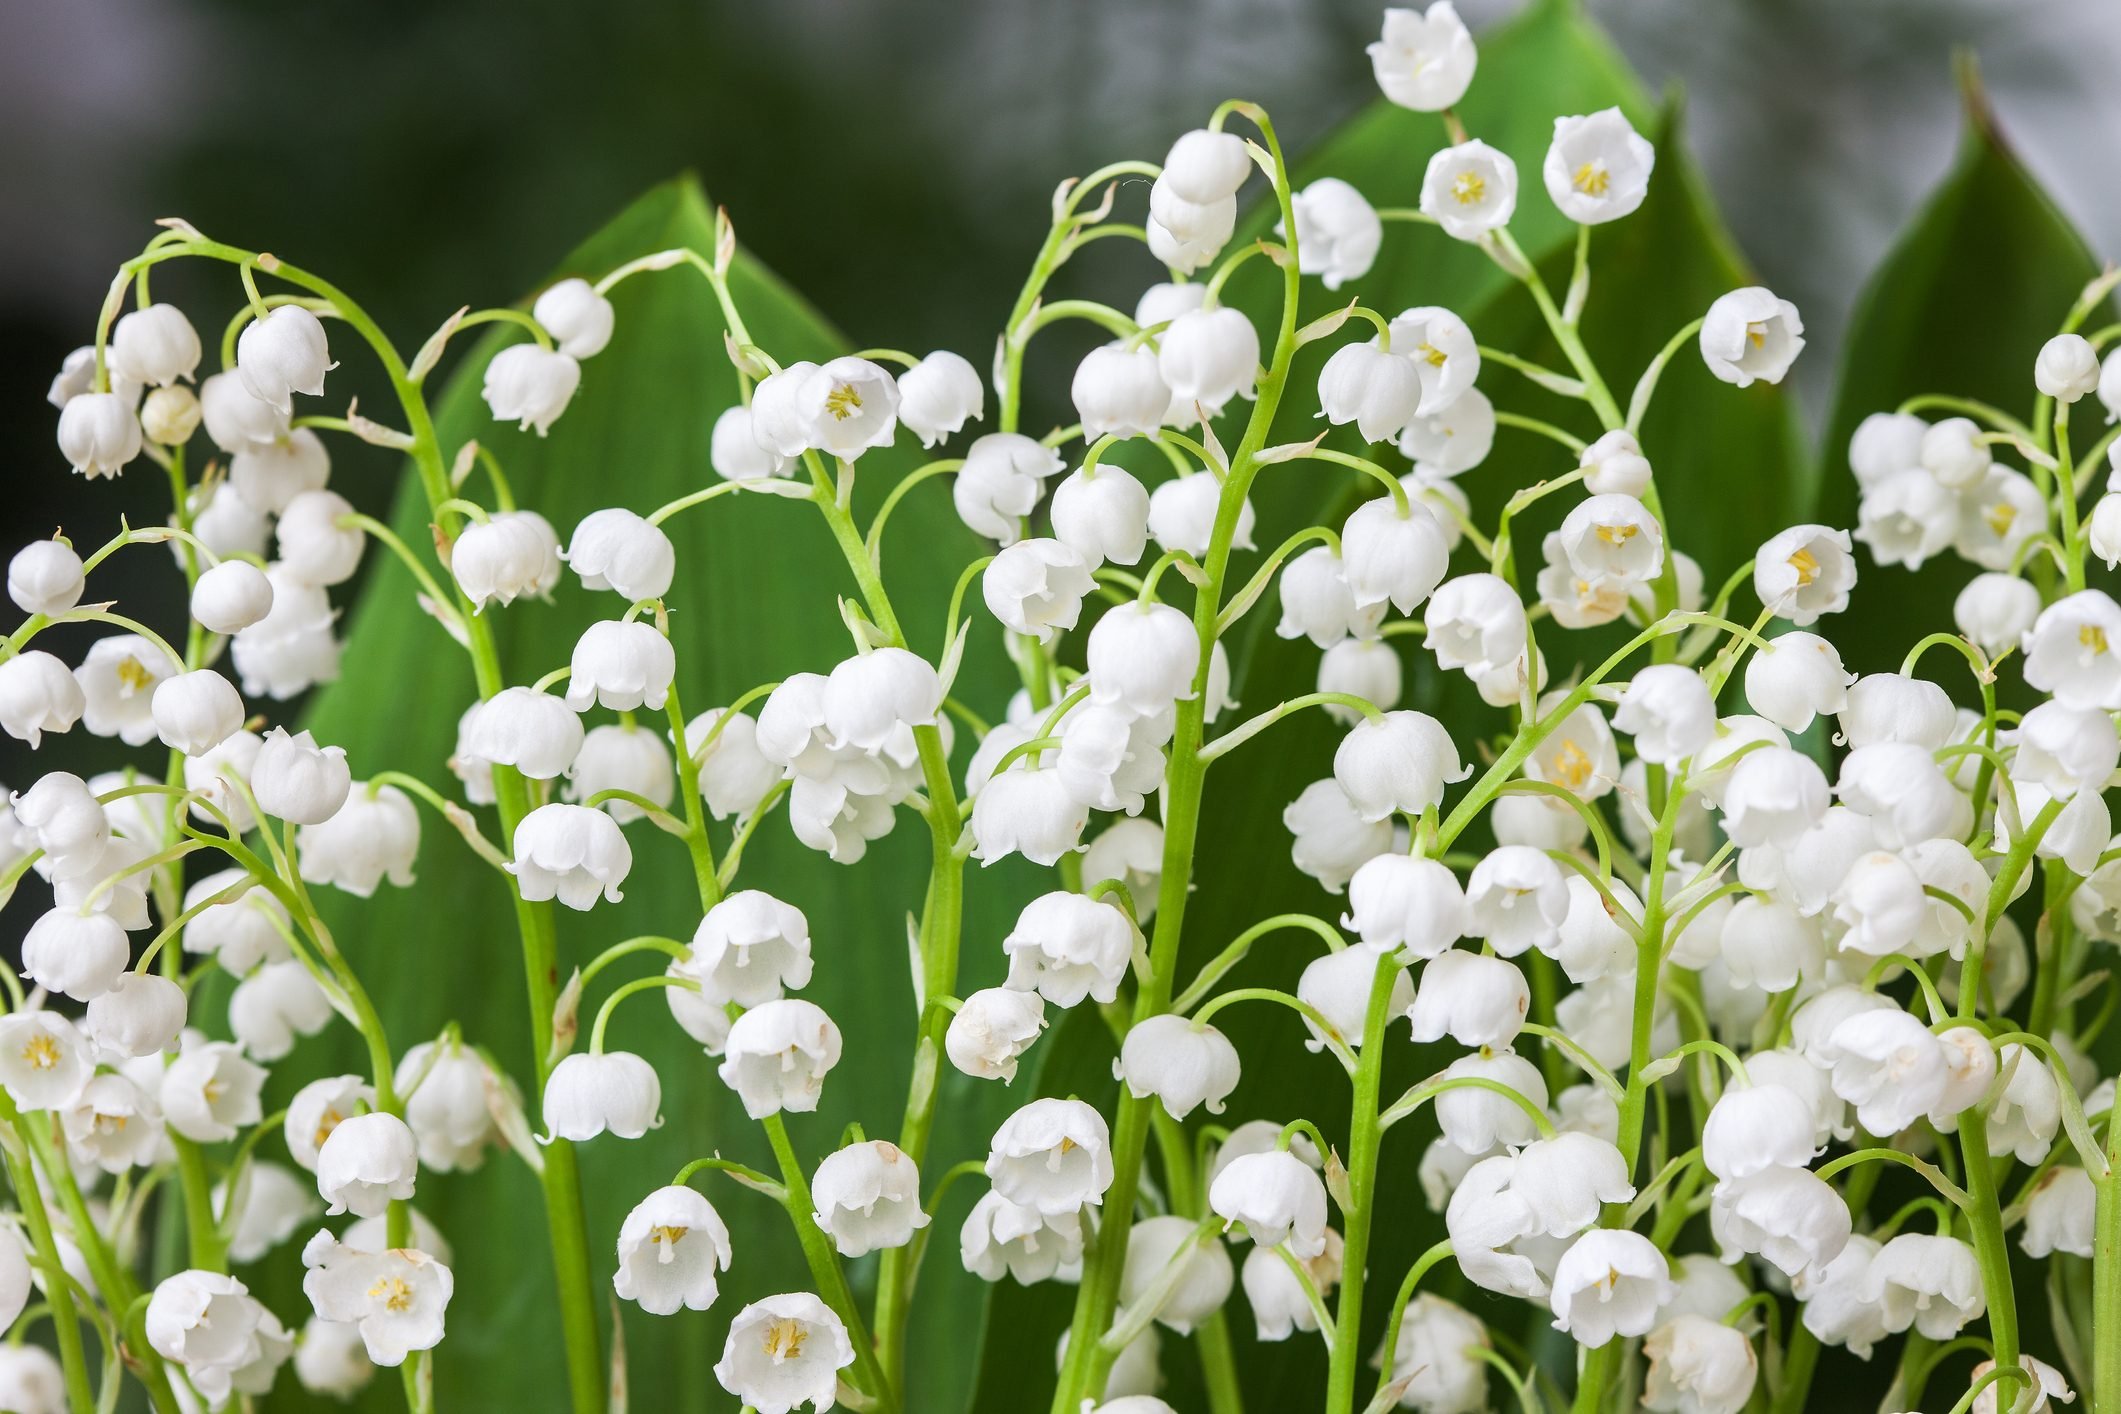 Blooming Lily of the valley in spring garden with shallow